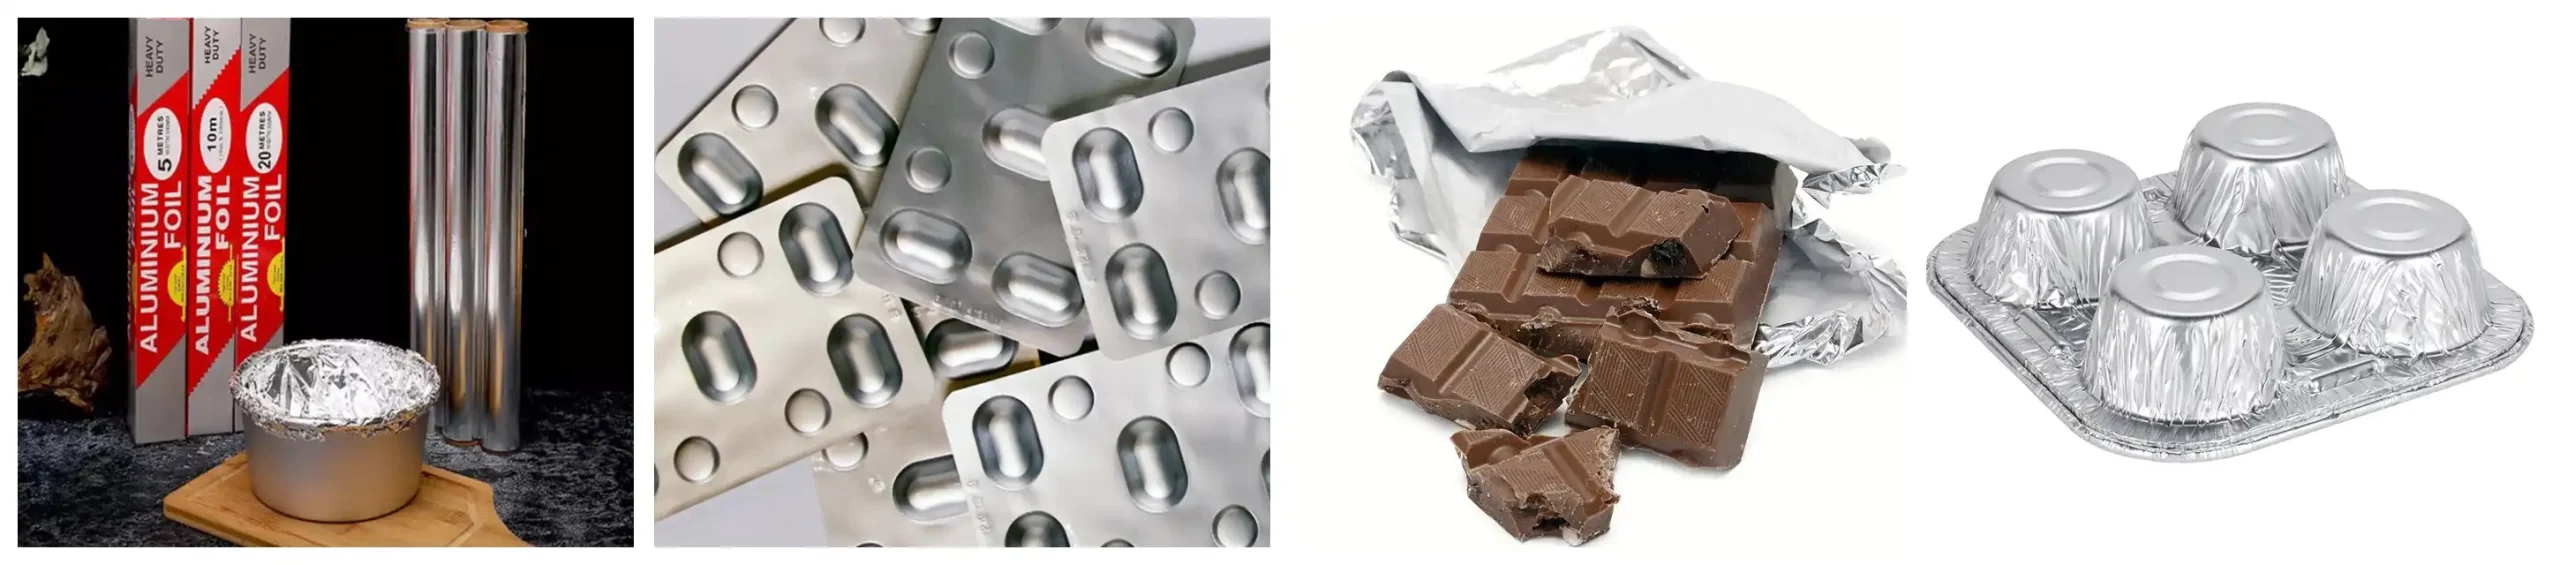 8021 aluminum foil for packaging medications, chocolate wrapping, yogurt lids, and other types of food packaging